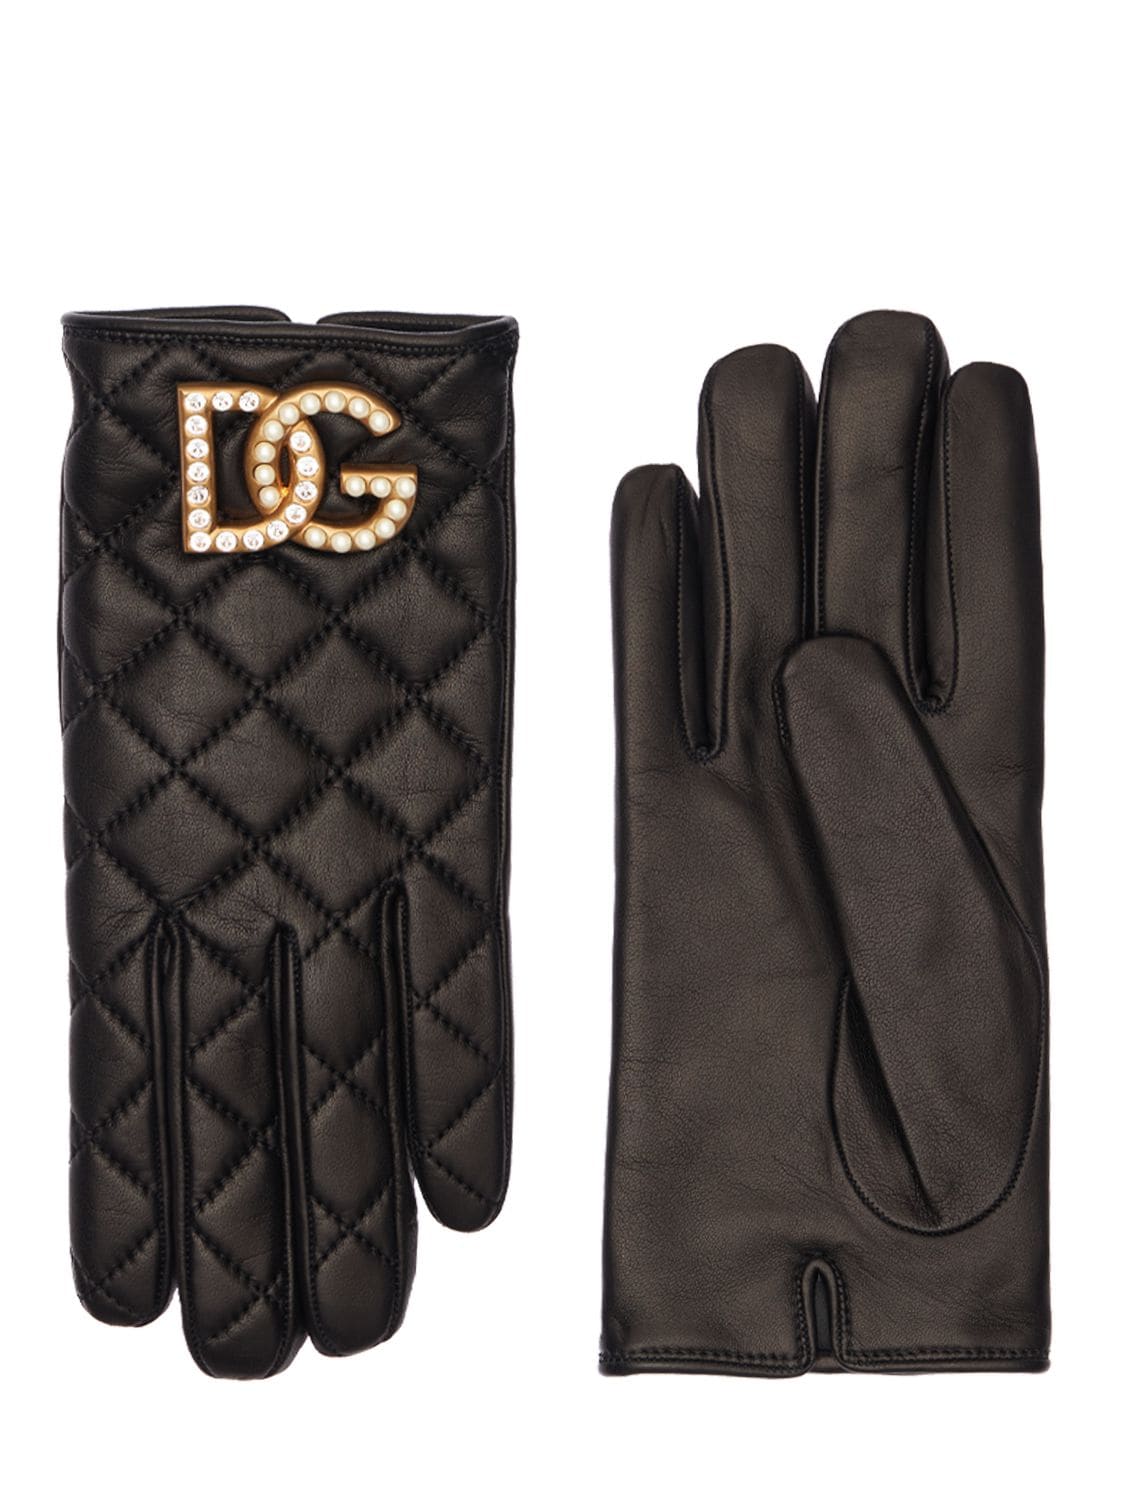 Dolce & Gabbana - Dg quilted leather gloves - Black | Luisaviaroma